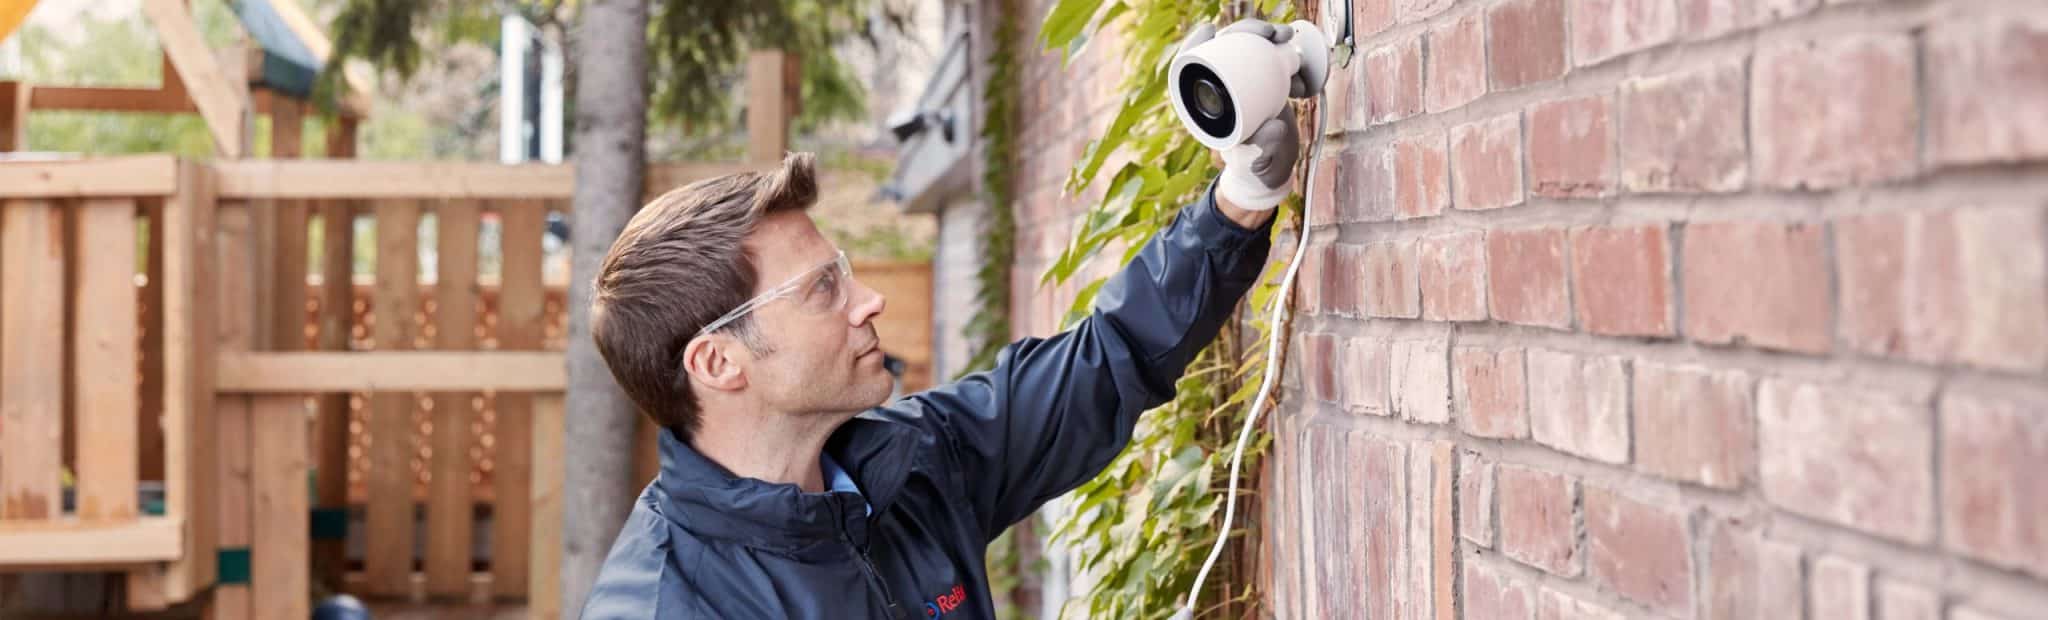 Reliance worker installing smart home camera outside of a house